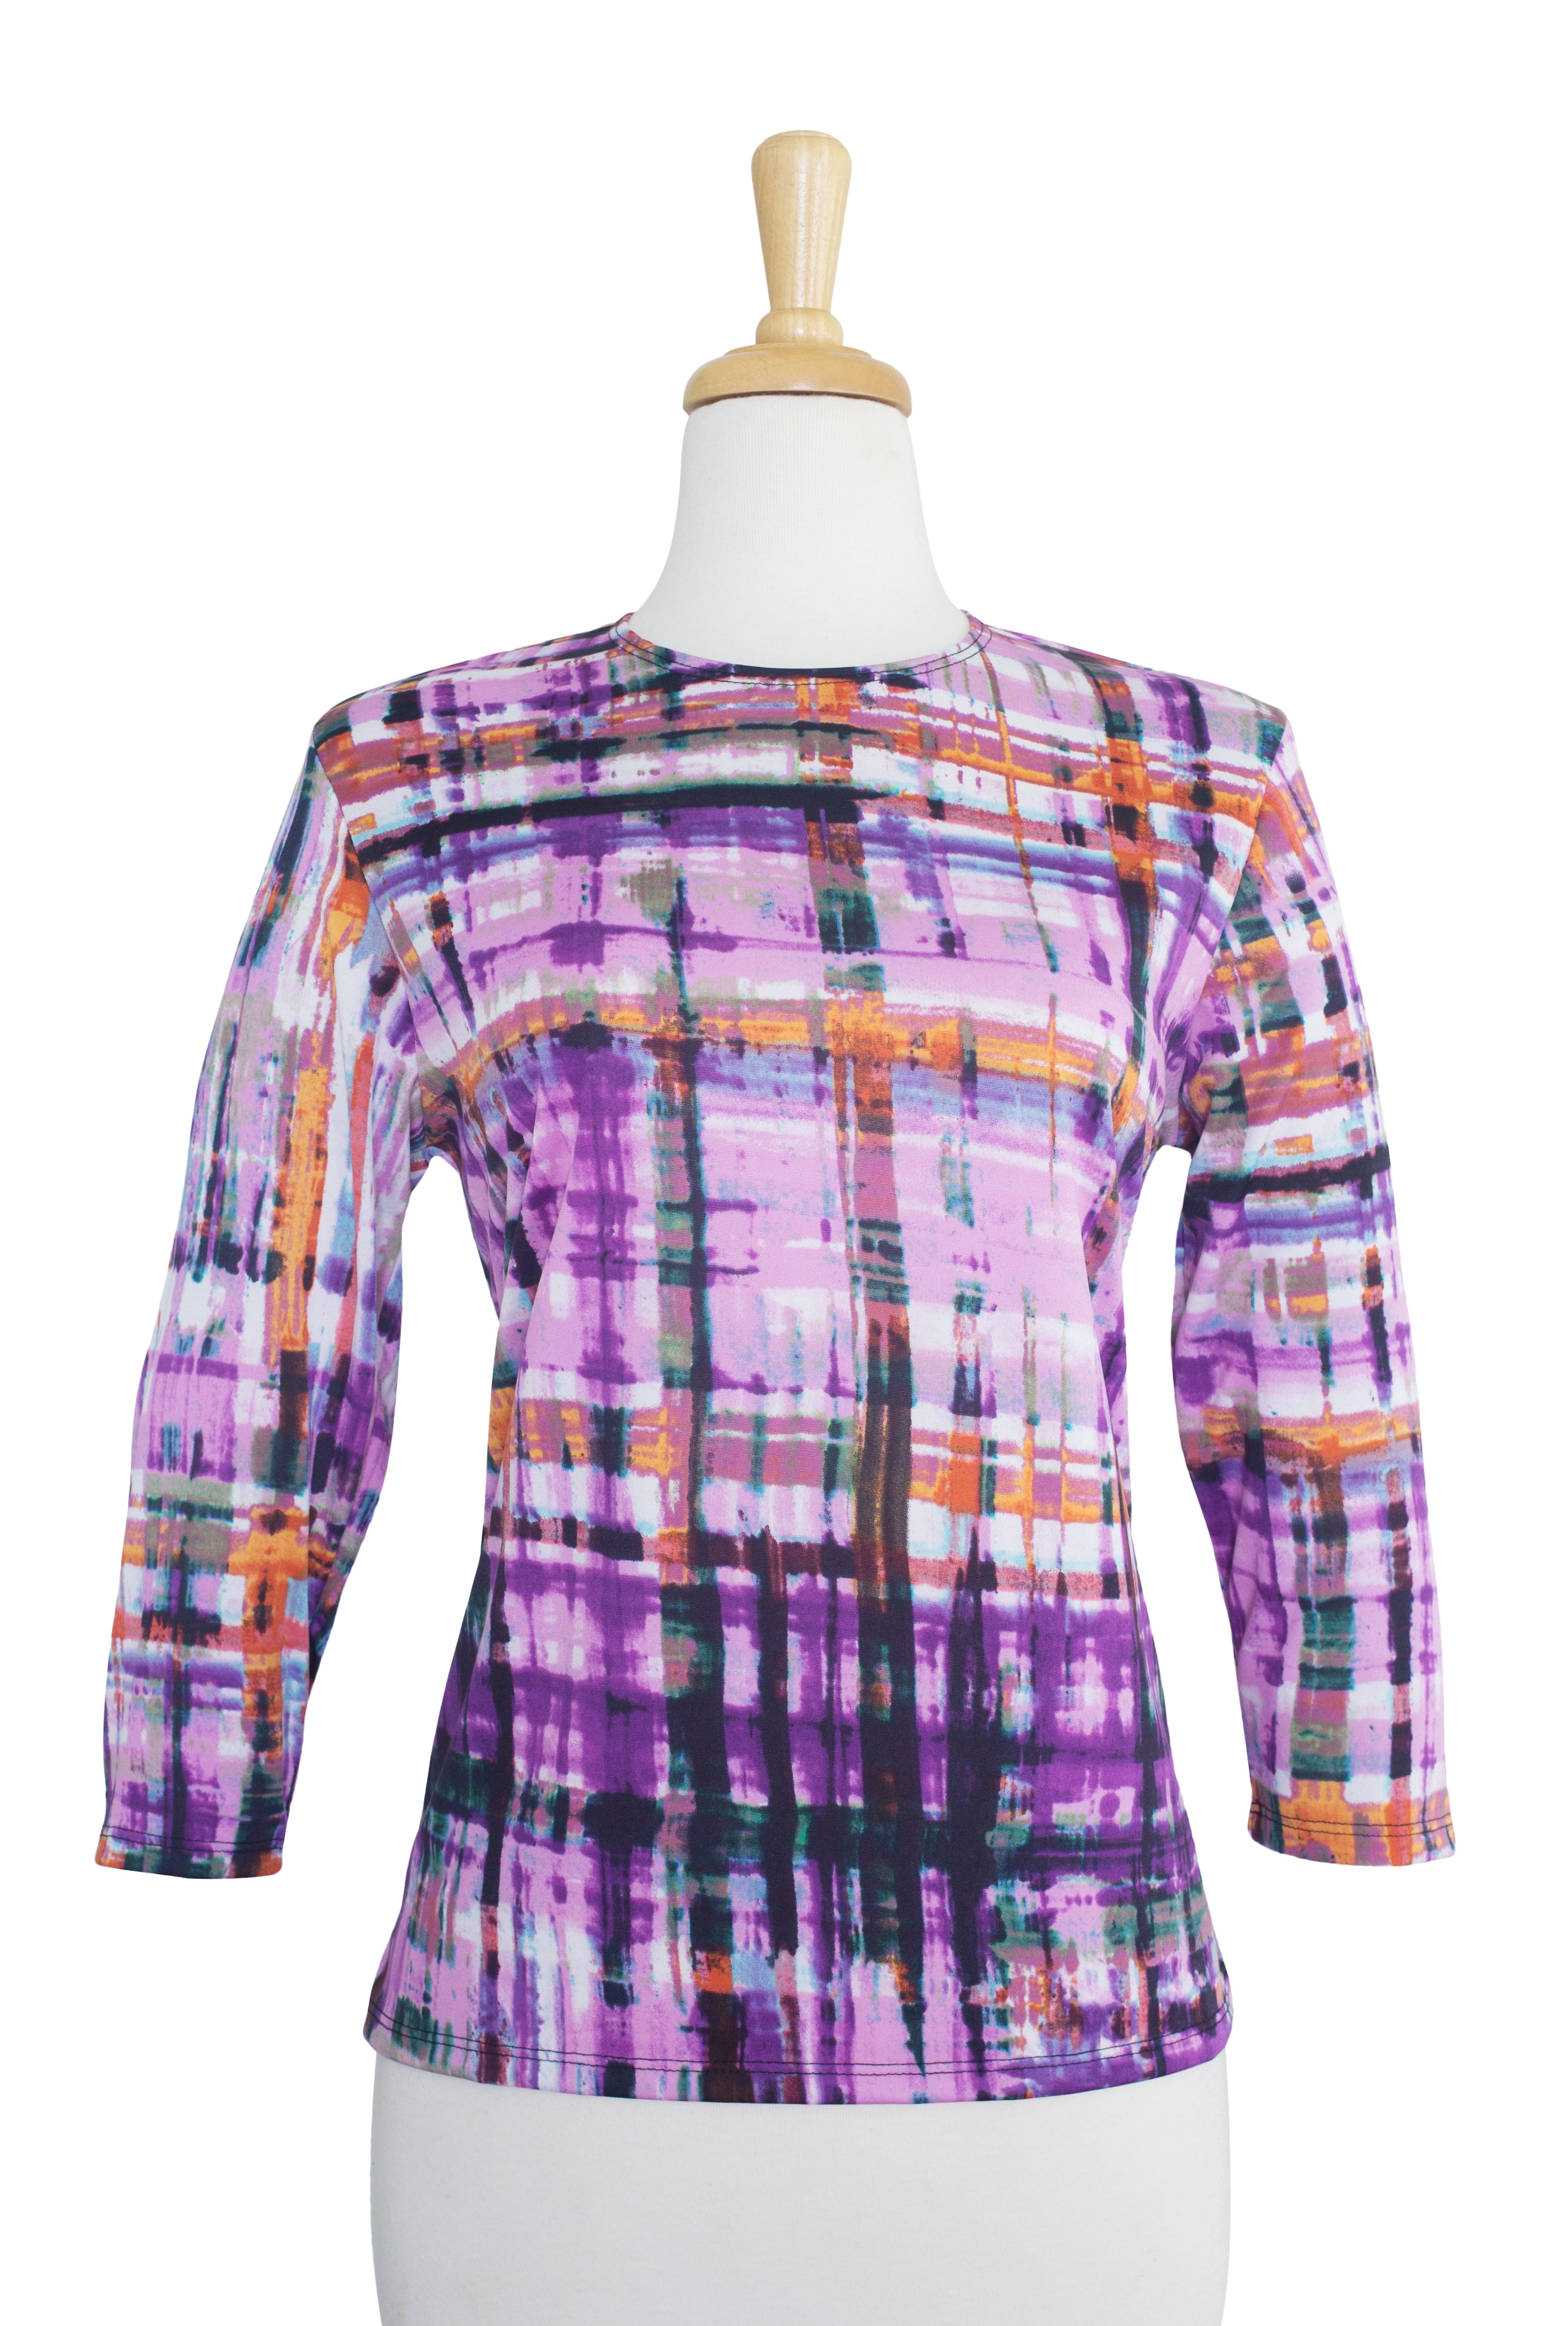 Shades of Purple and Lilac Abstract Microfiber 3/4 Sleeve Top 